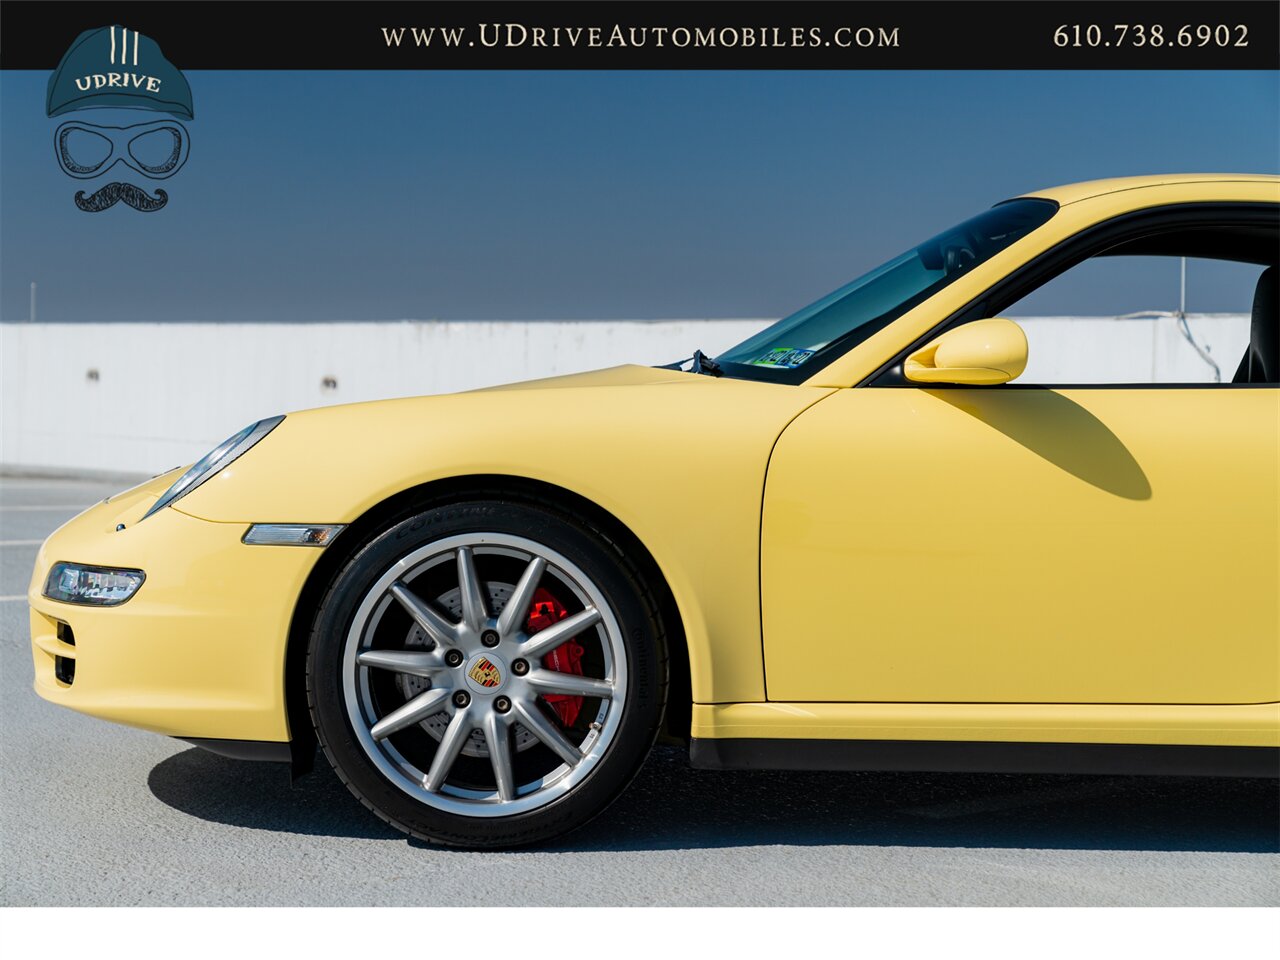 2007 Porsche 911 Carrera 4S 997 C4S Paint To Sample Pastel Yellow  6 Speed Sport Chrono Full Leather Yellow Gauges - Photo 9 - West Chester, PA 19382